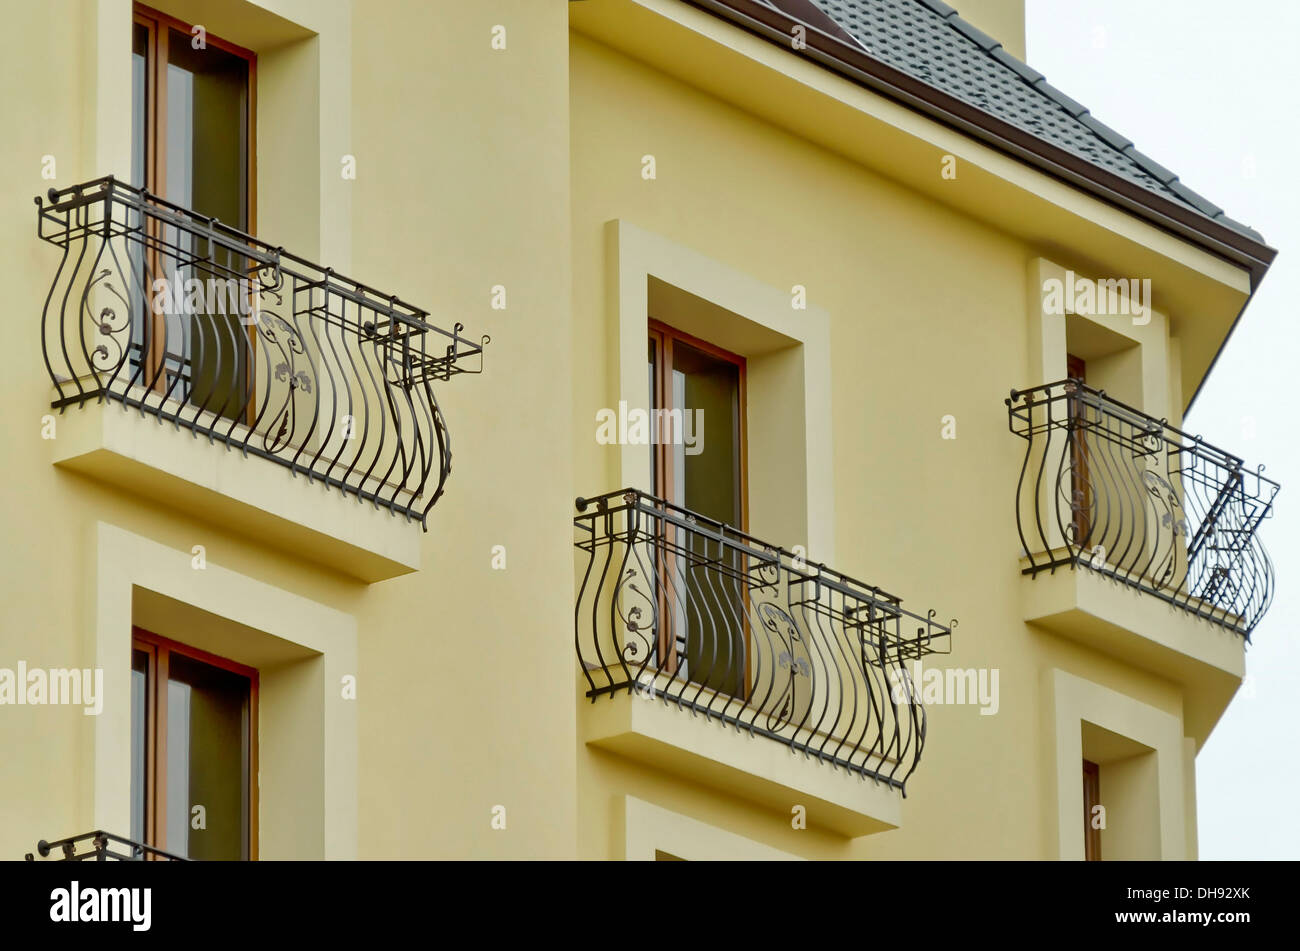 New building - balcony with metal ornaments rail Stock Photo